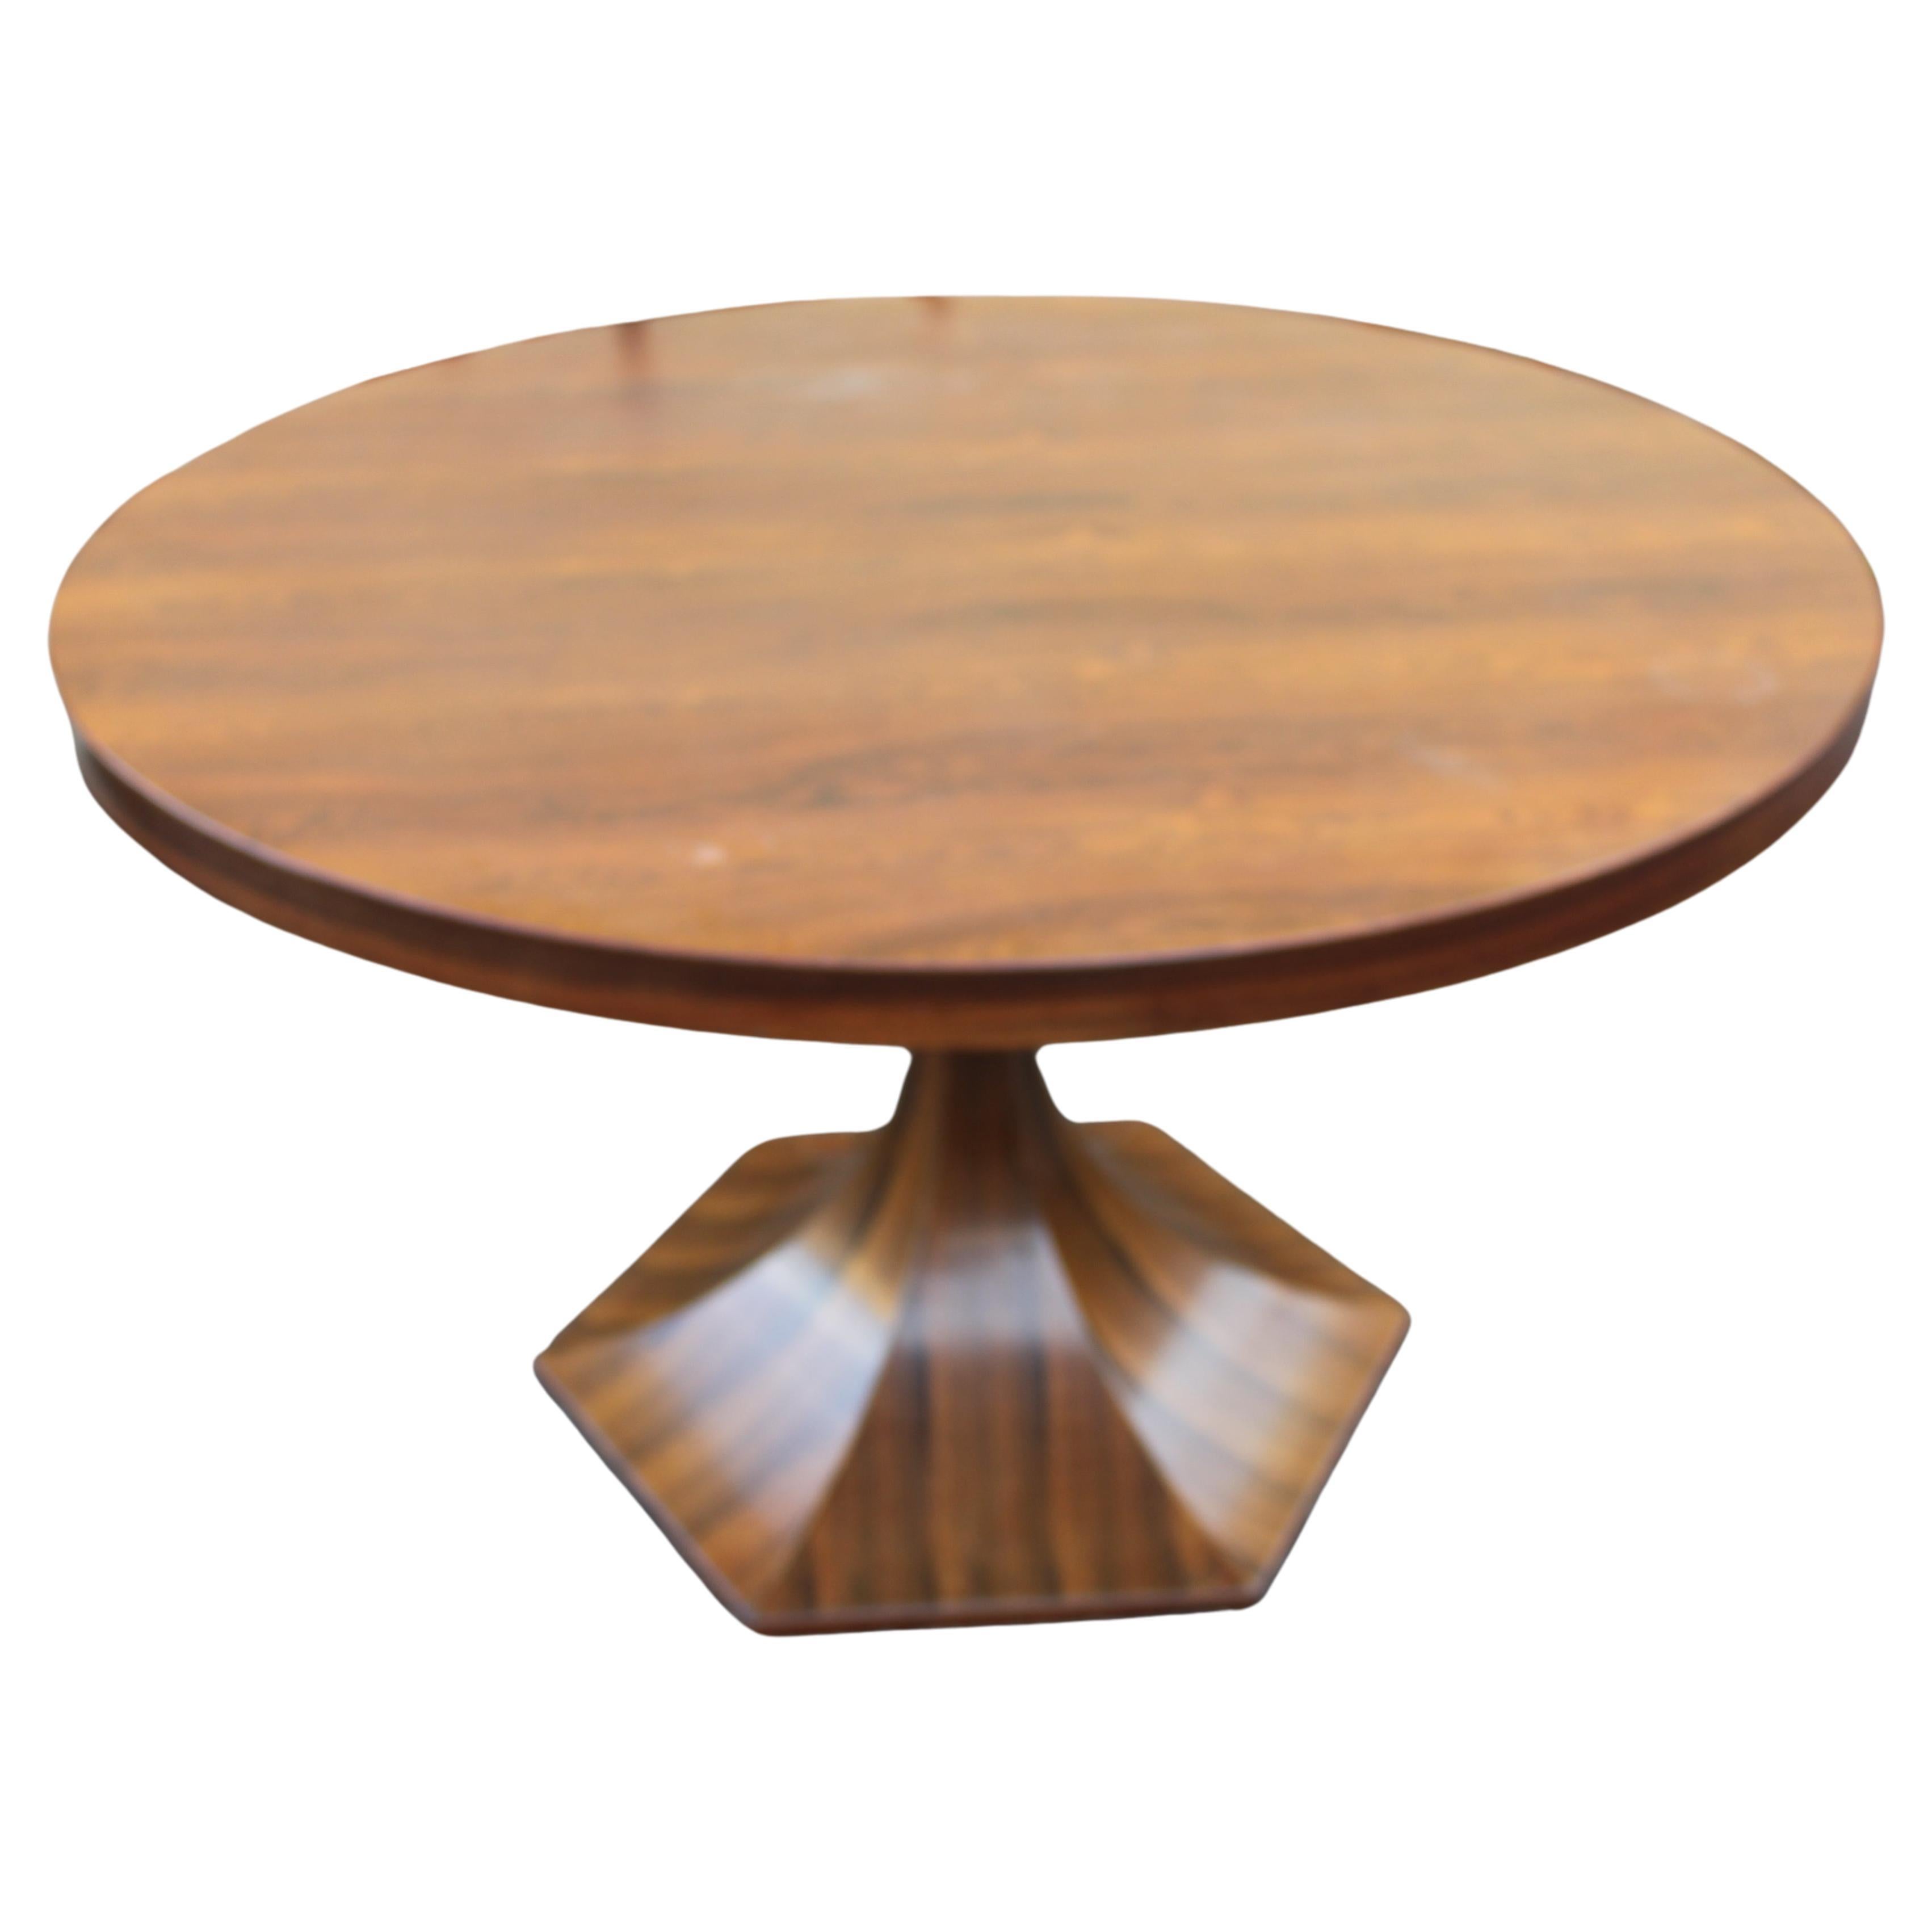 Giulio Moscatelli for Meroni round center or dining table in rare rosewood with hexagonal base, Italy, circa 1964. This exquisite midcentury table design although simple in form is extraordinary with the stark rosewood grain on the table top as well